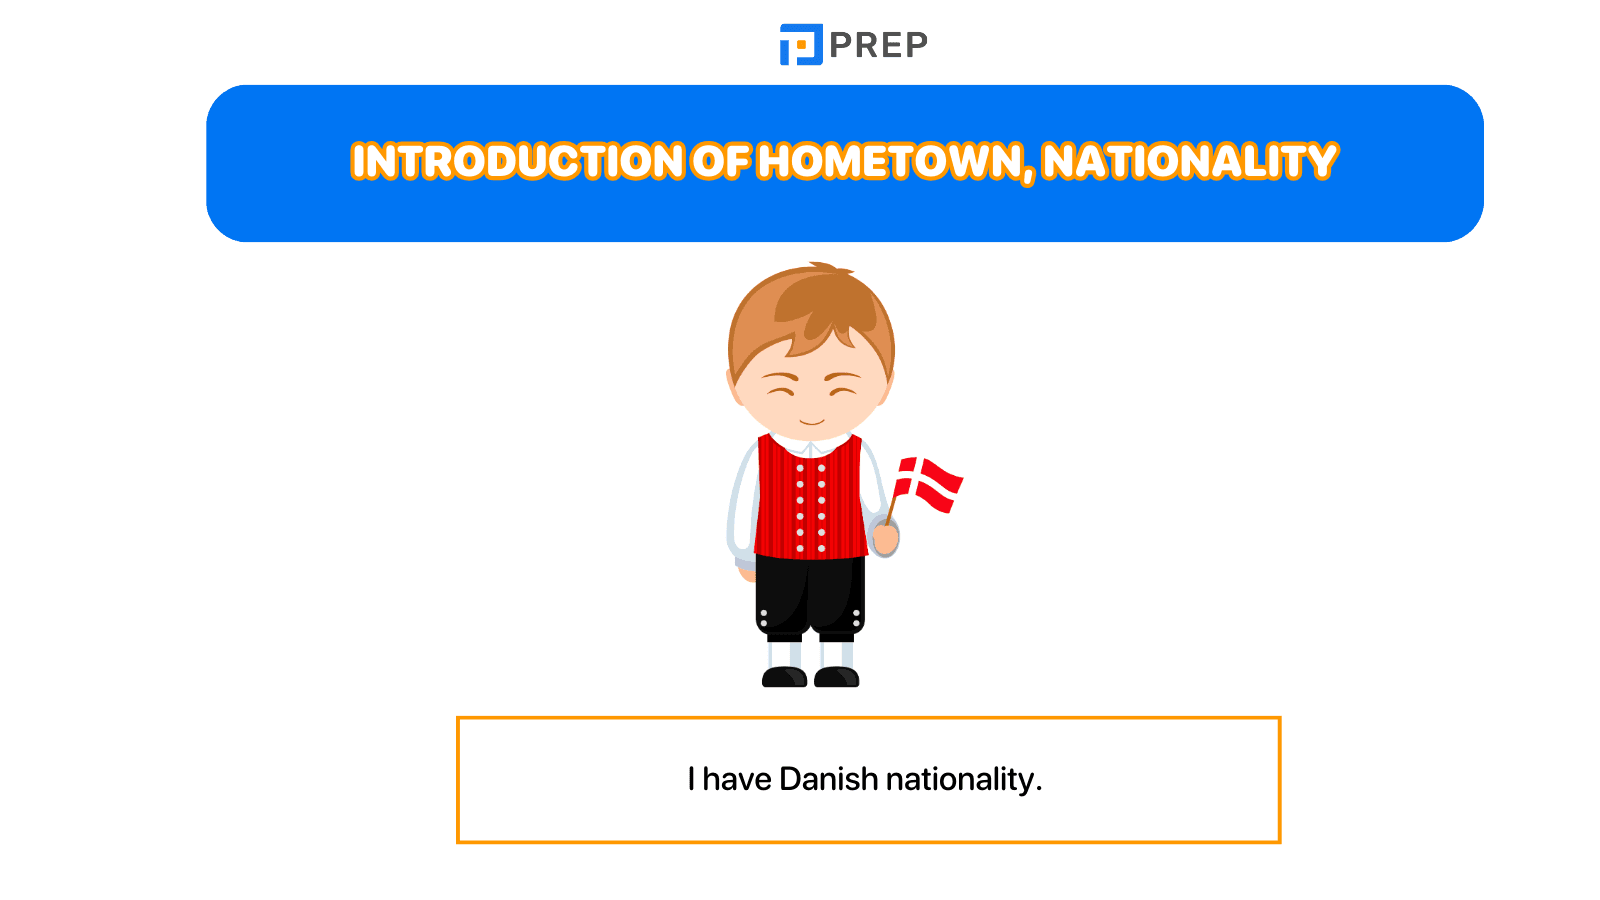 Introduction of hometown, nationality